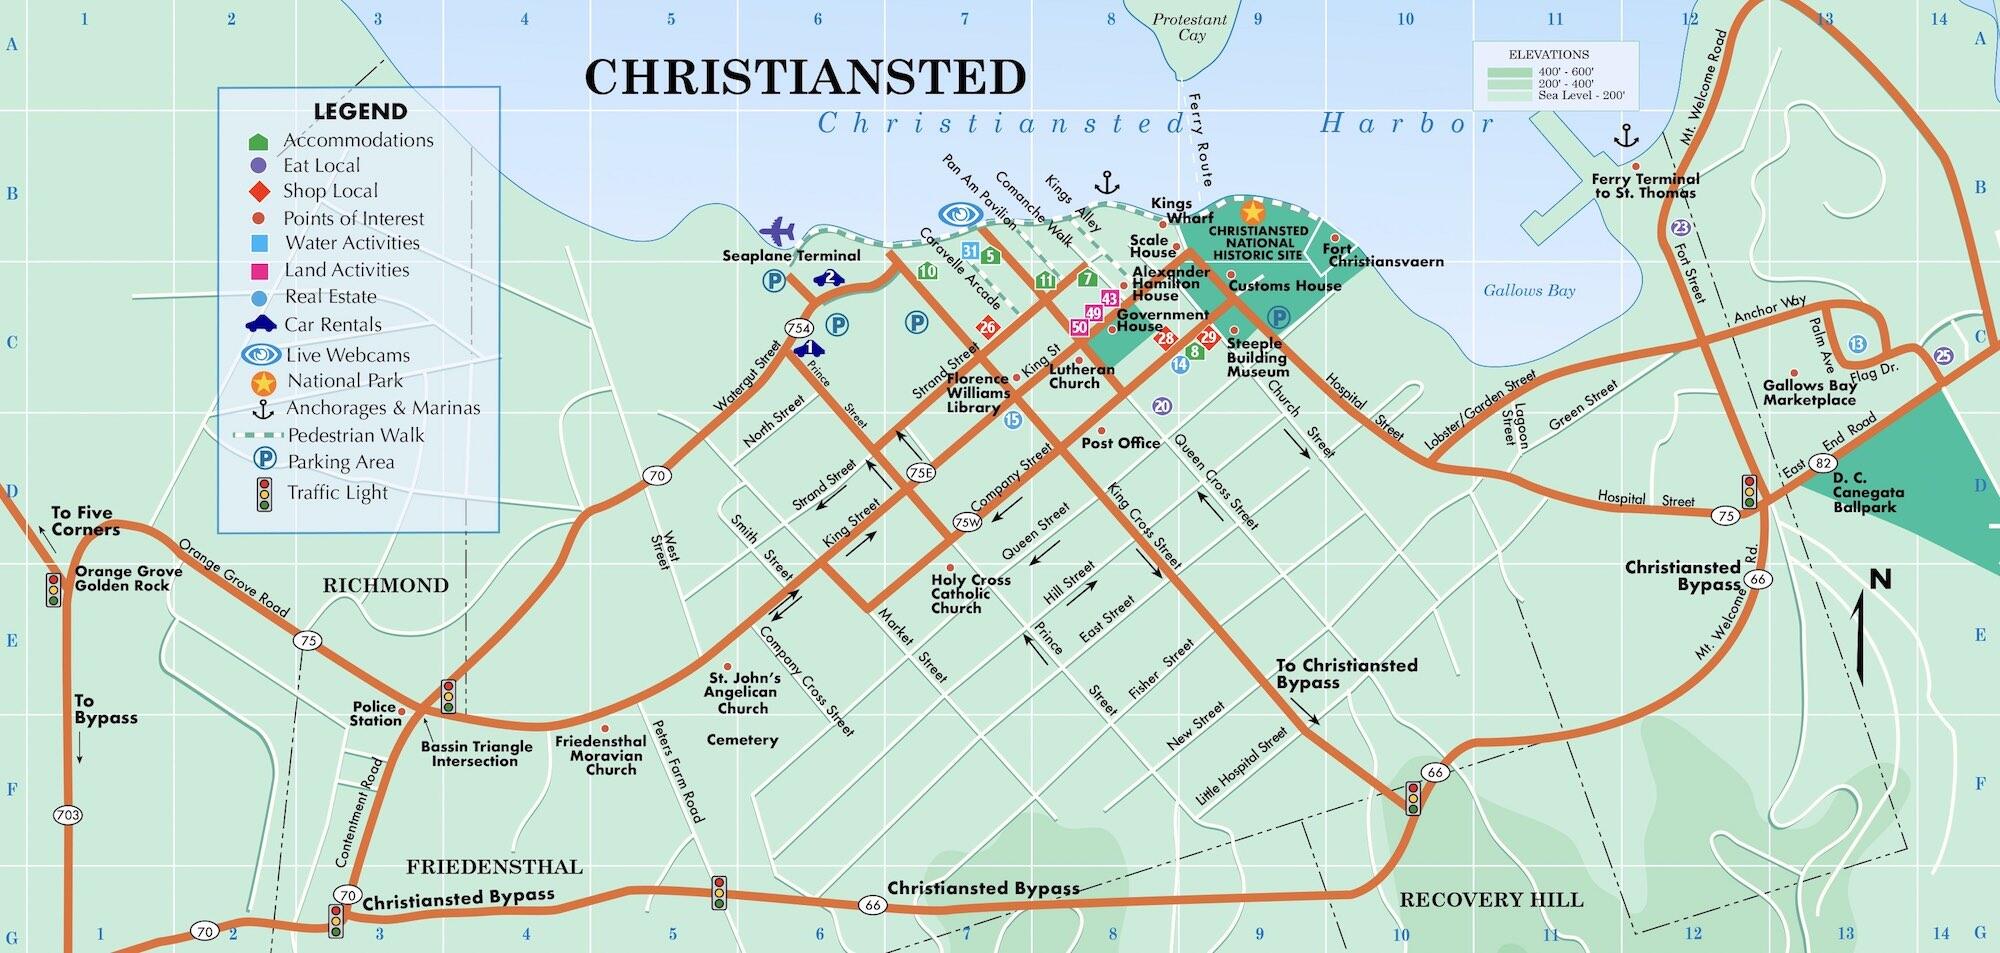 christiansted-st-croix-map.jpg